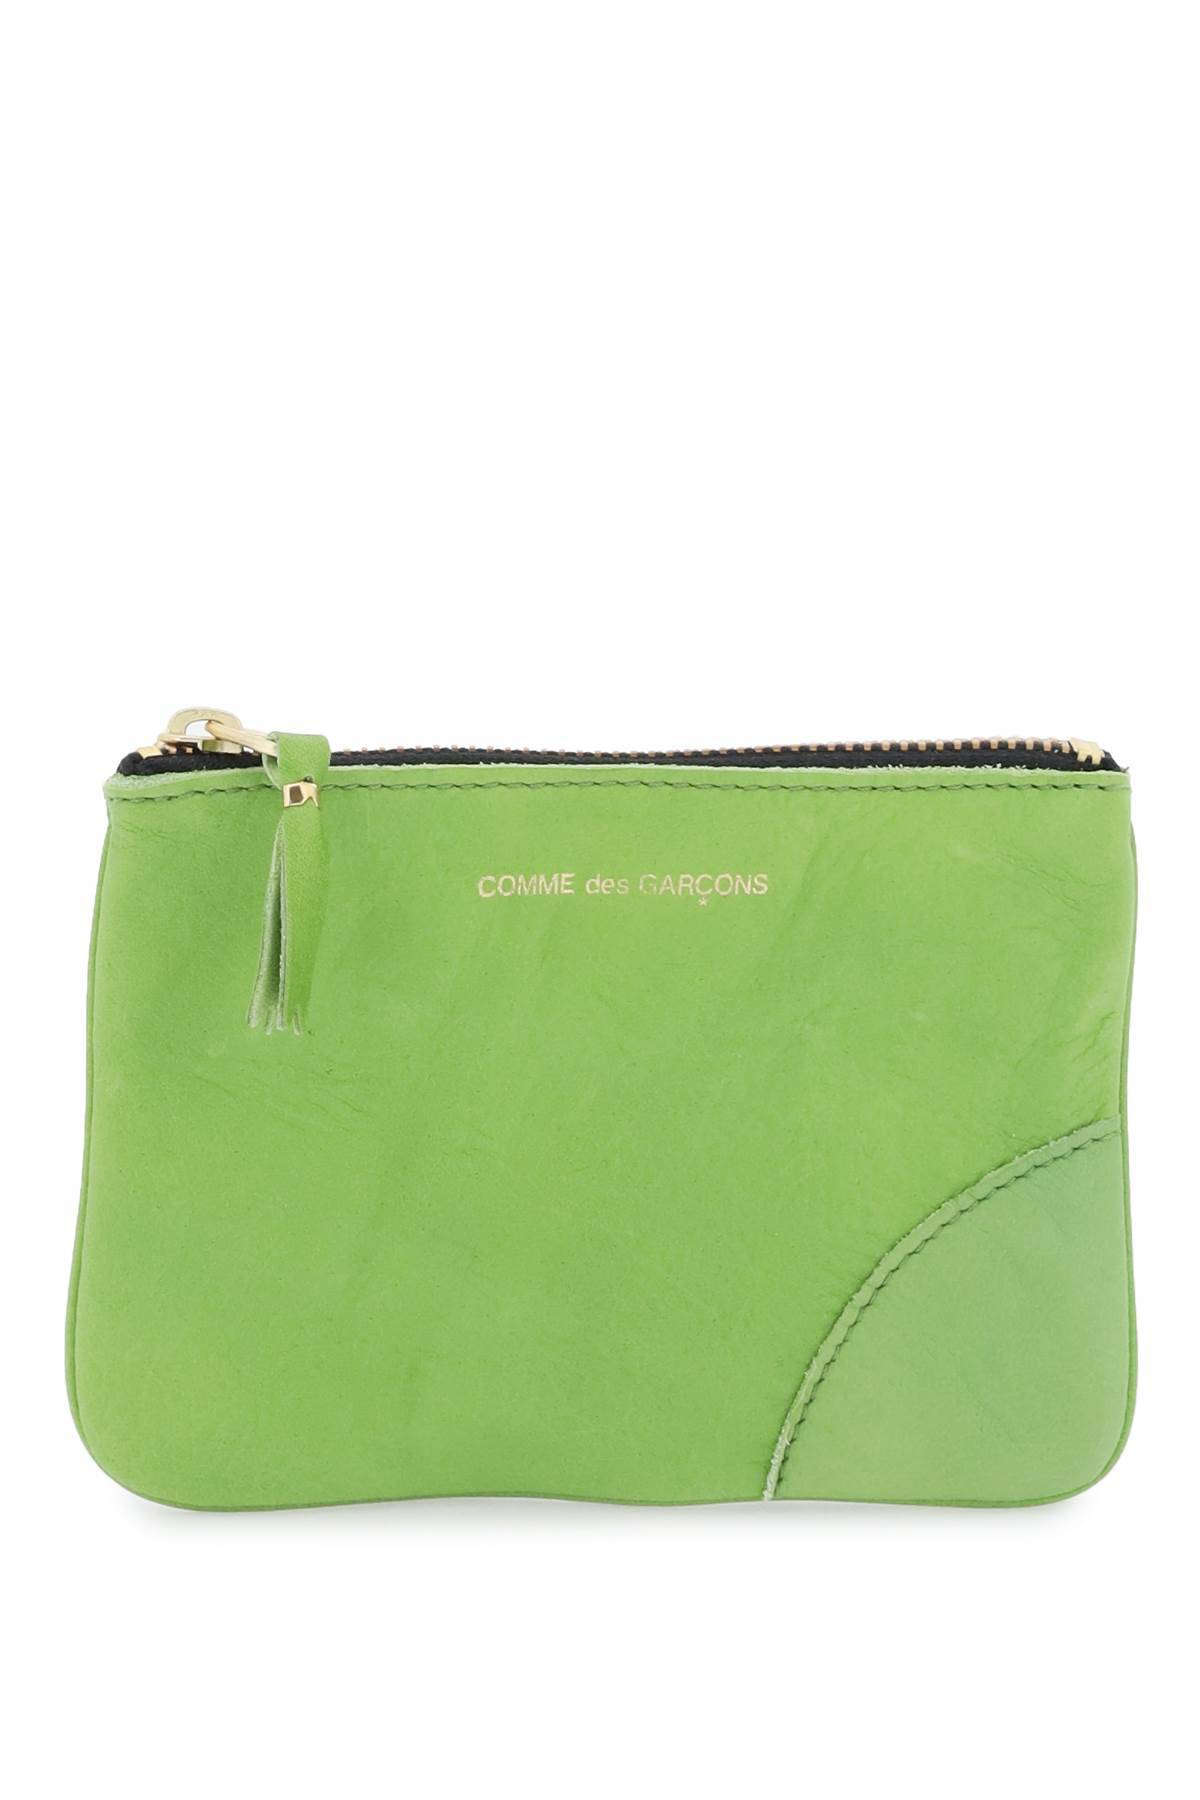 COMME DES GARCONS WALLET COMME DES GARCONS WALLET leather coin purse